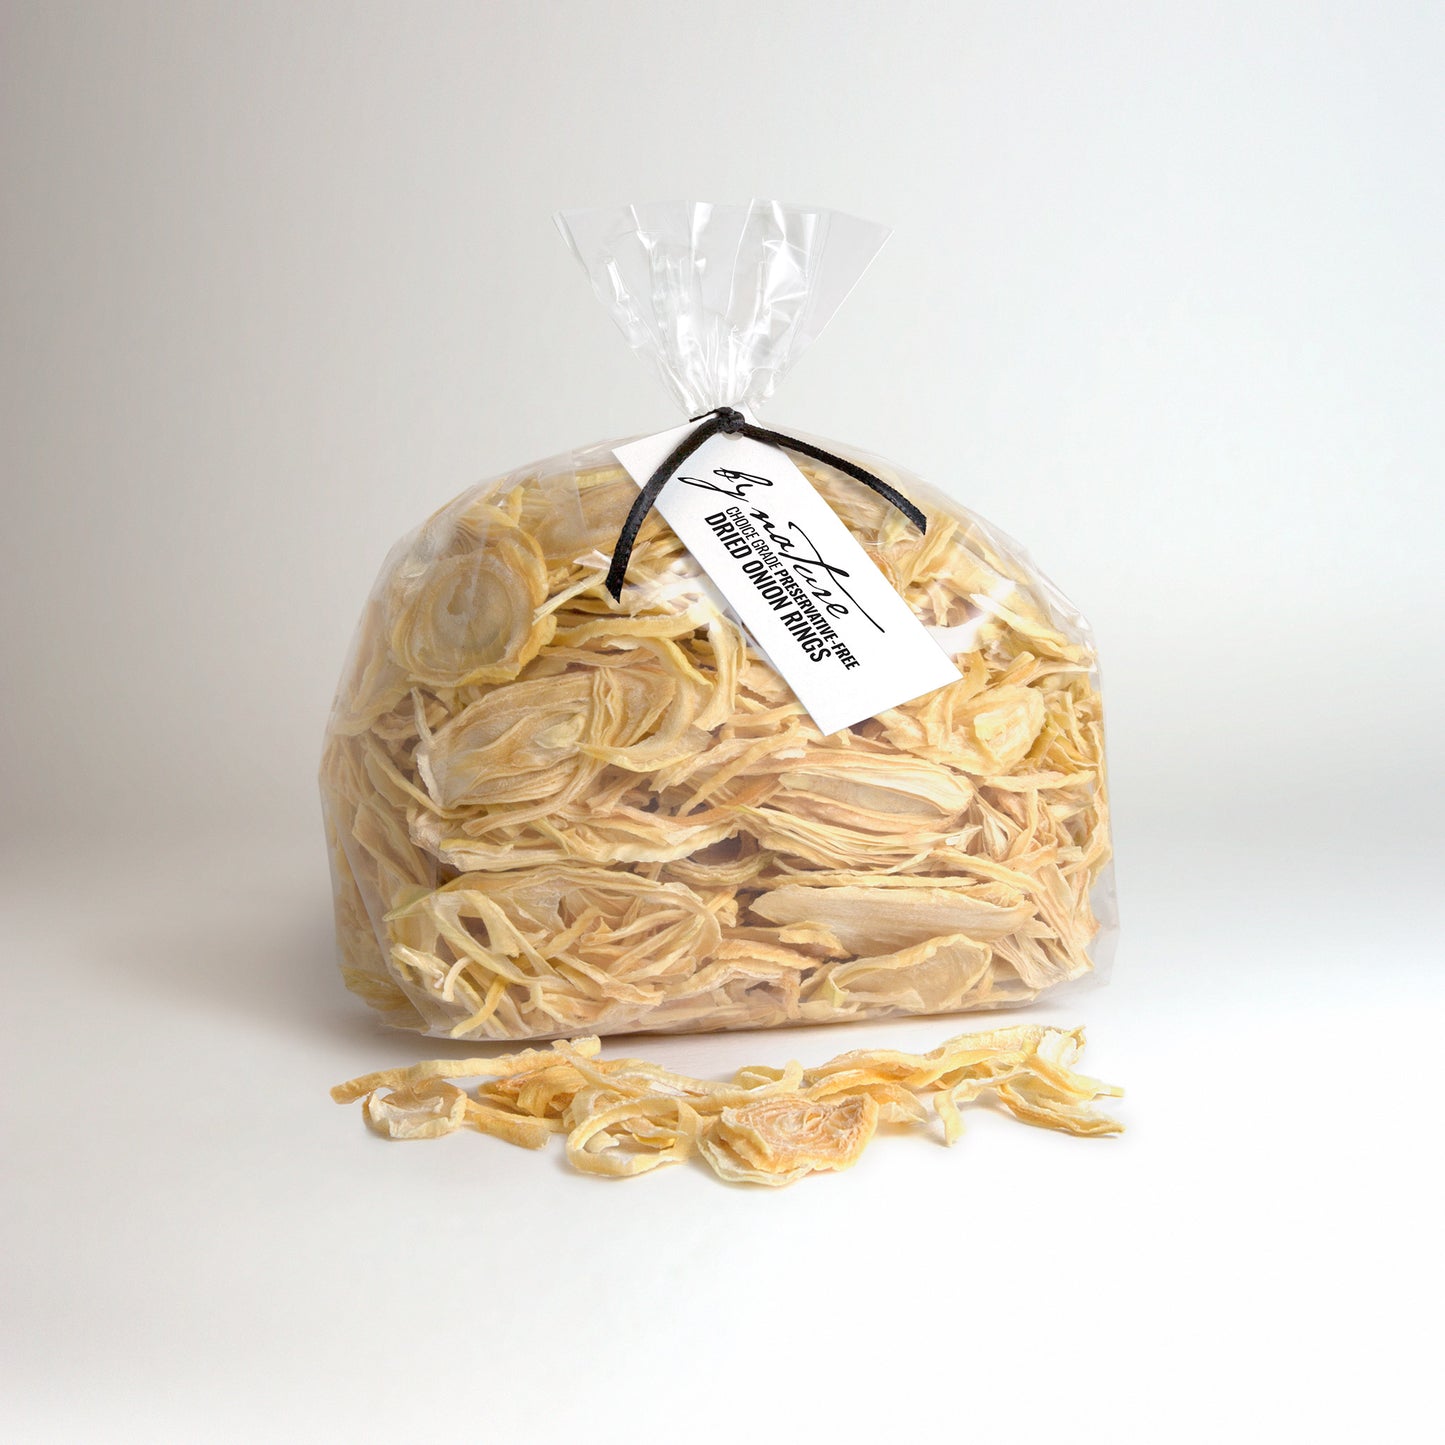 BY NATURE Dried Onion Rings, 250g - preservative-free.